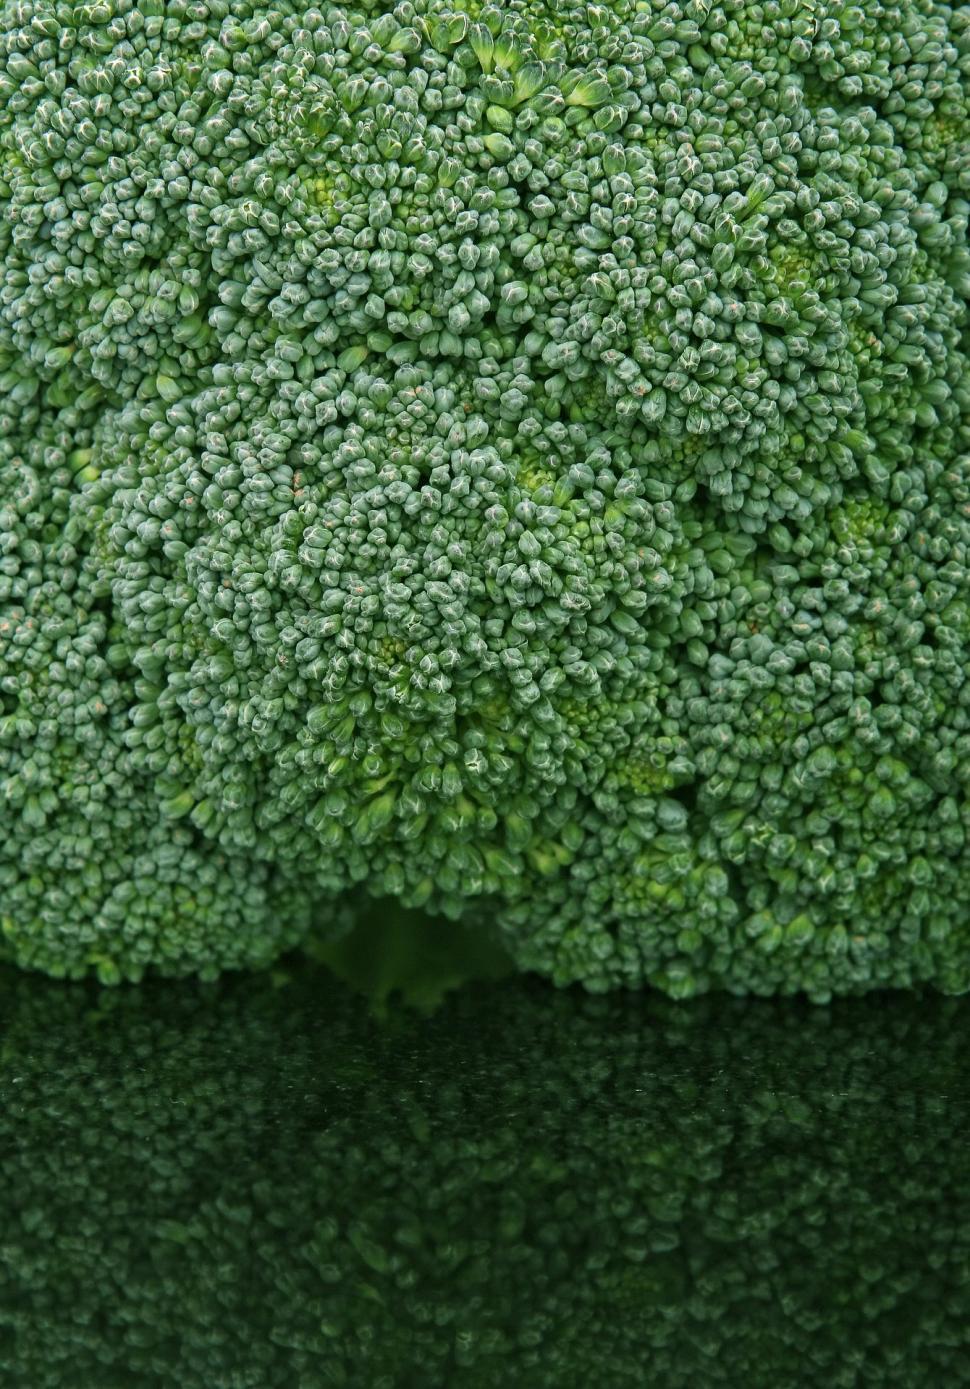 Free Image of Close Up of a Bunch of Broccoli 